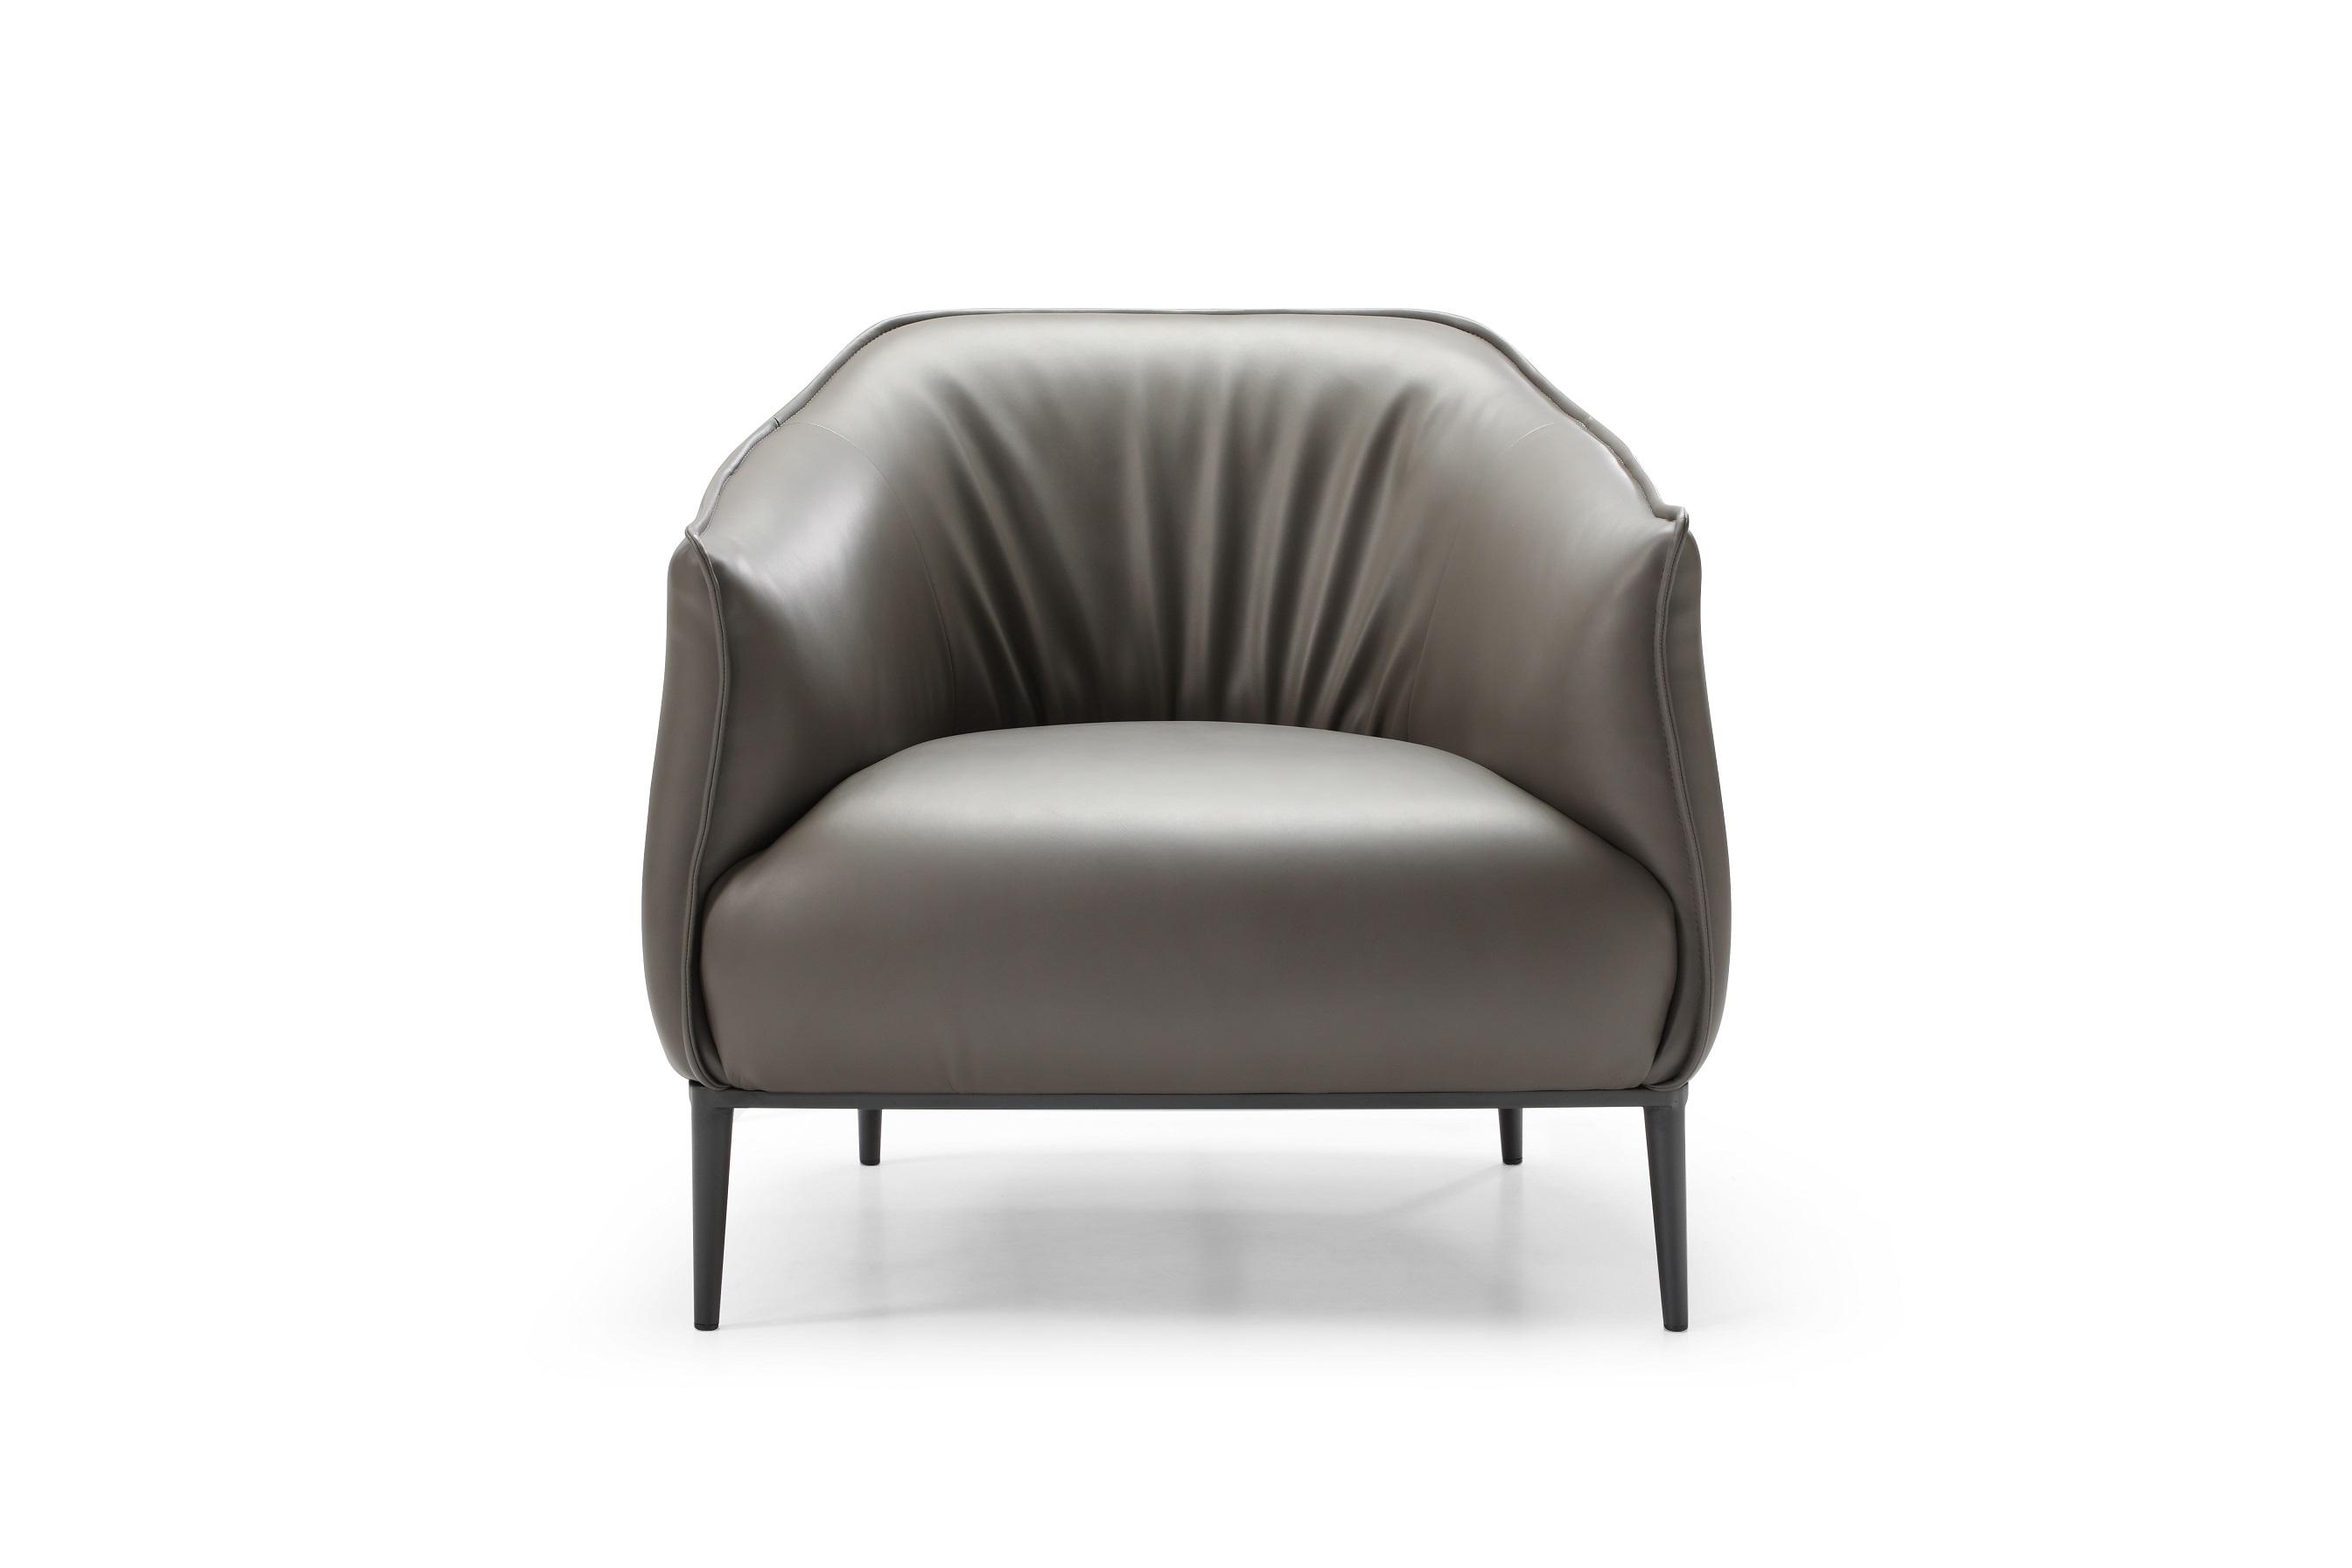 Modern Accent Chair CH1706P-DGRY Benbow CH1706P-DGRY in Dark Gray Faux Leather